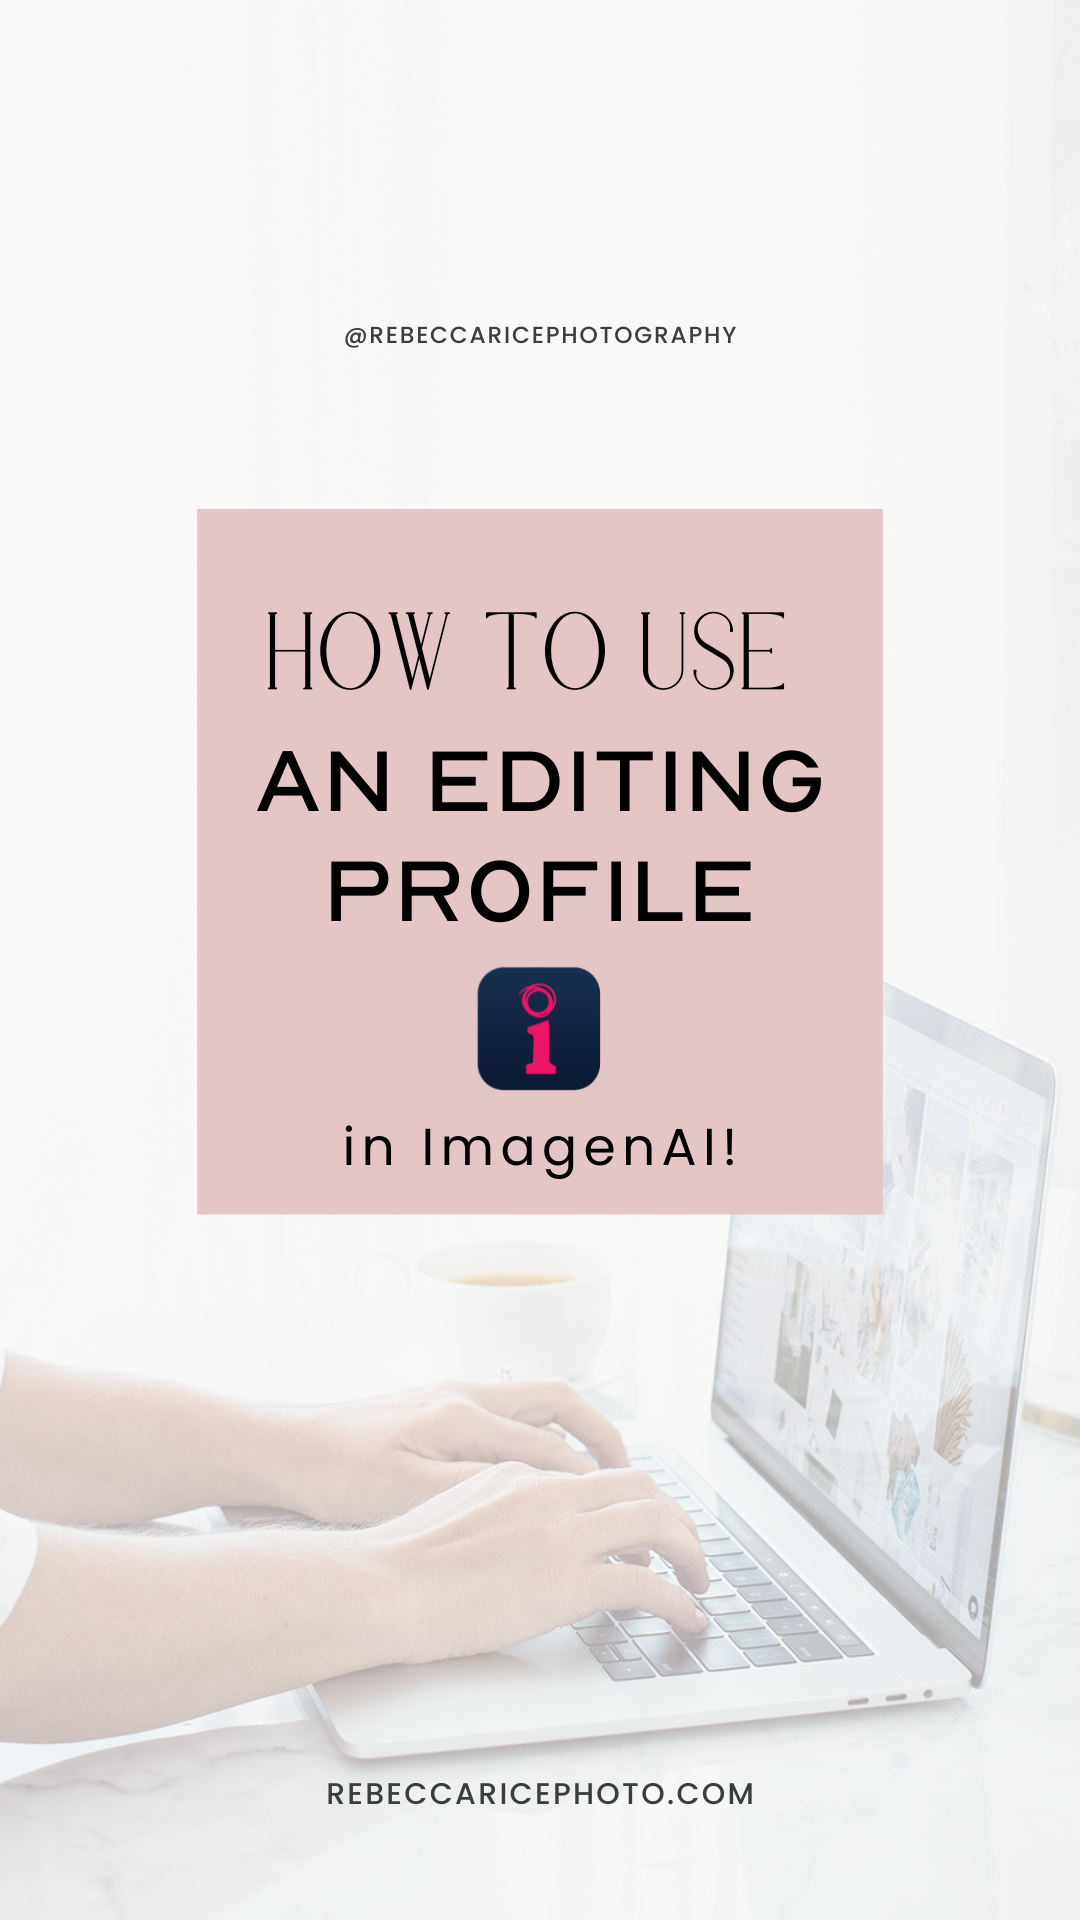 How to Use an Editing Profile in ImagenAI! An editing software to save you HOURS behind a computer editing!

Click to see more on the blog today!
-rebeccaricephoto.com